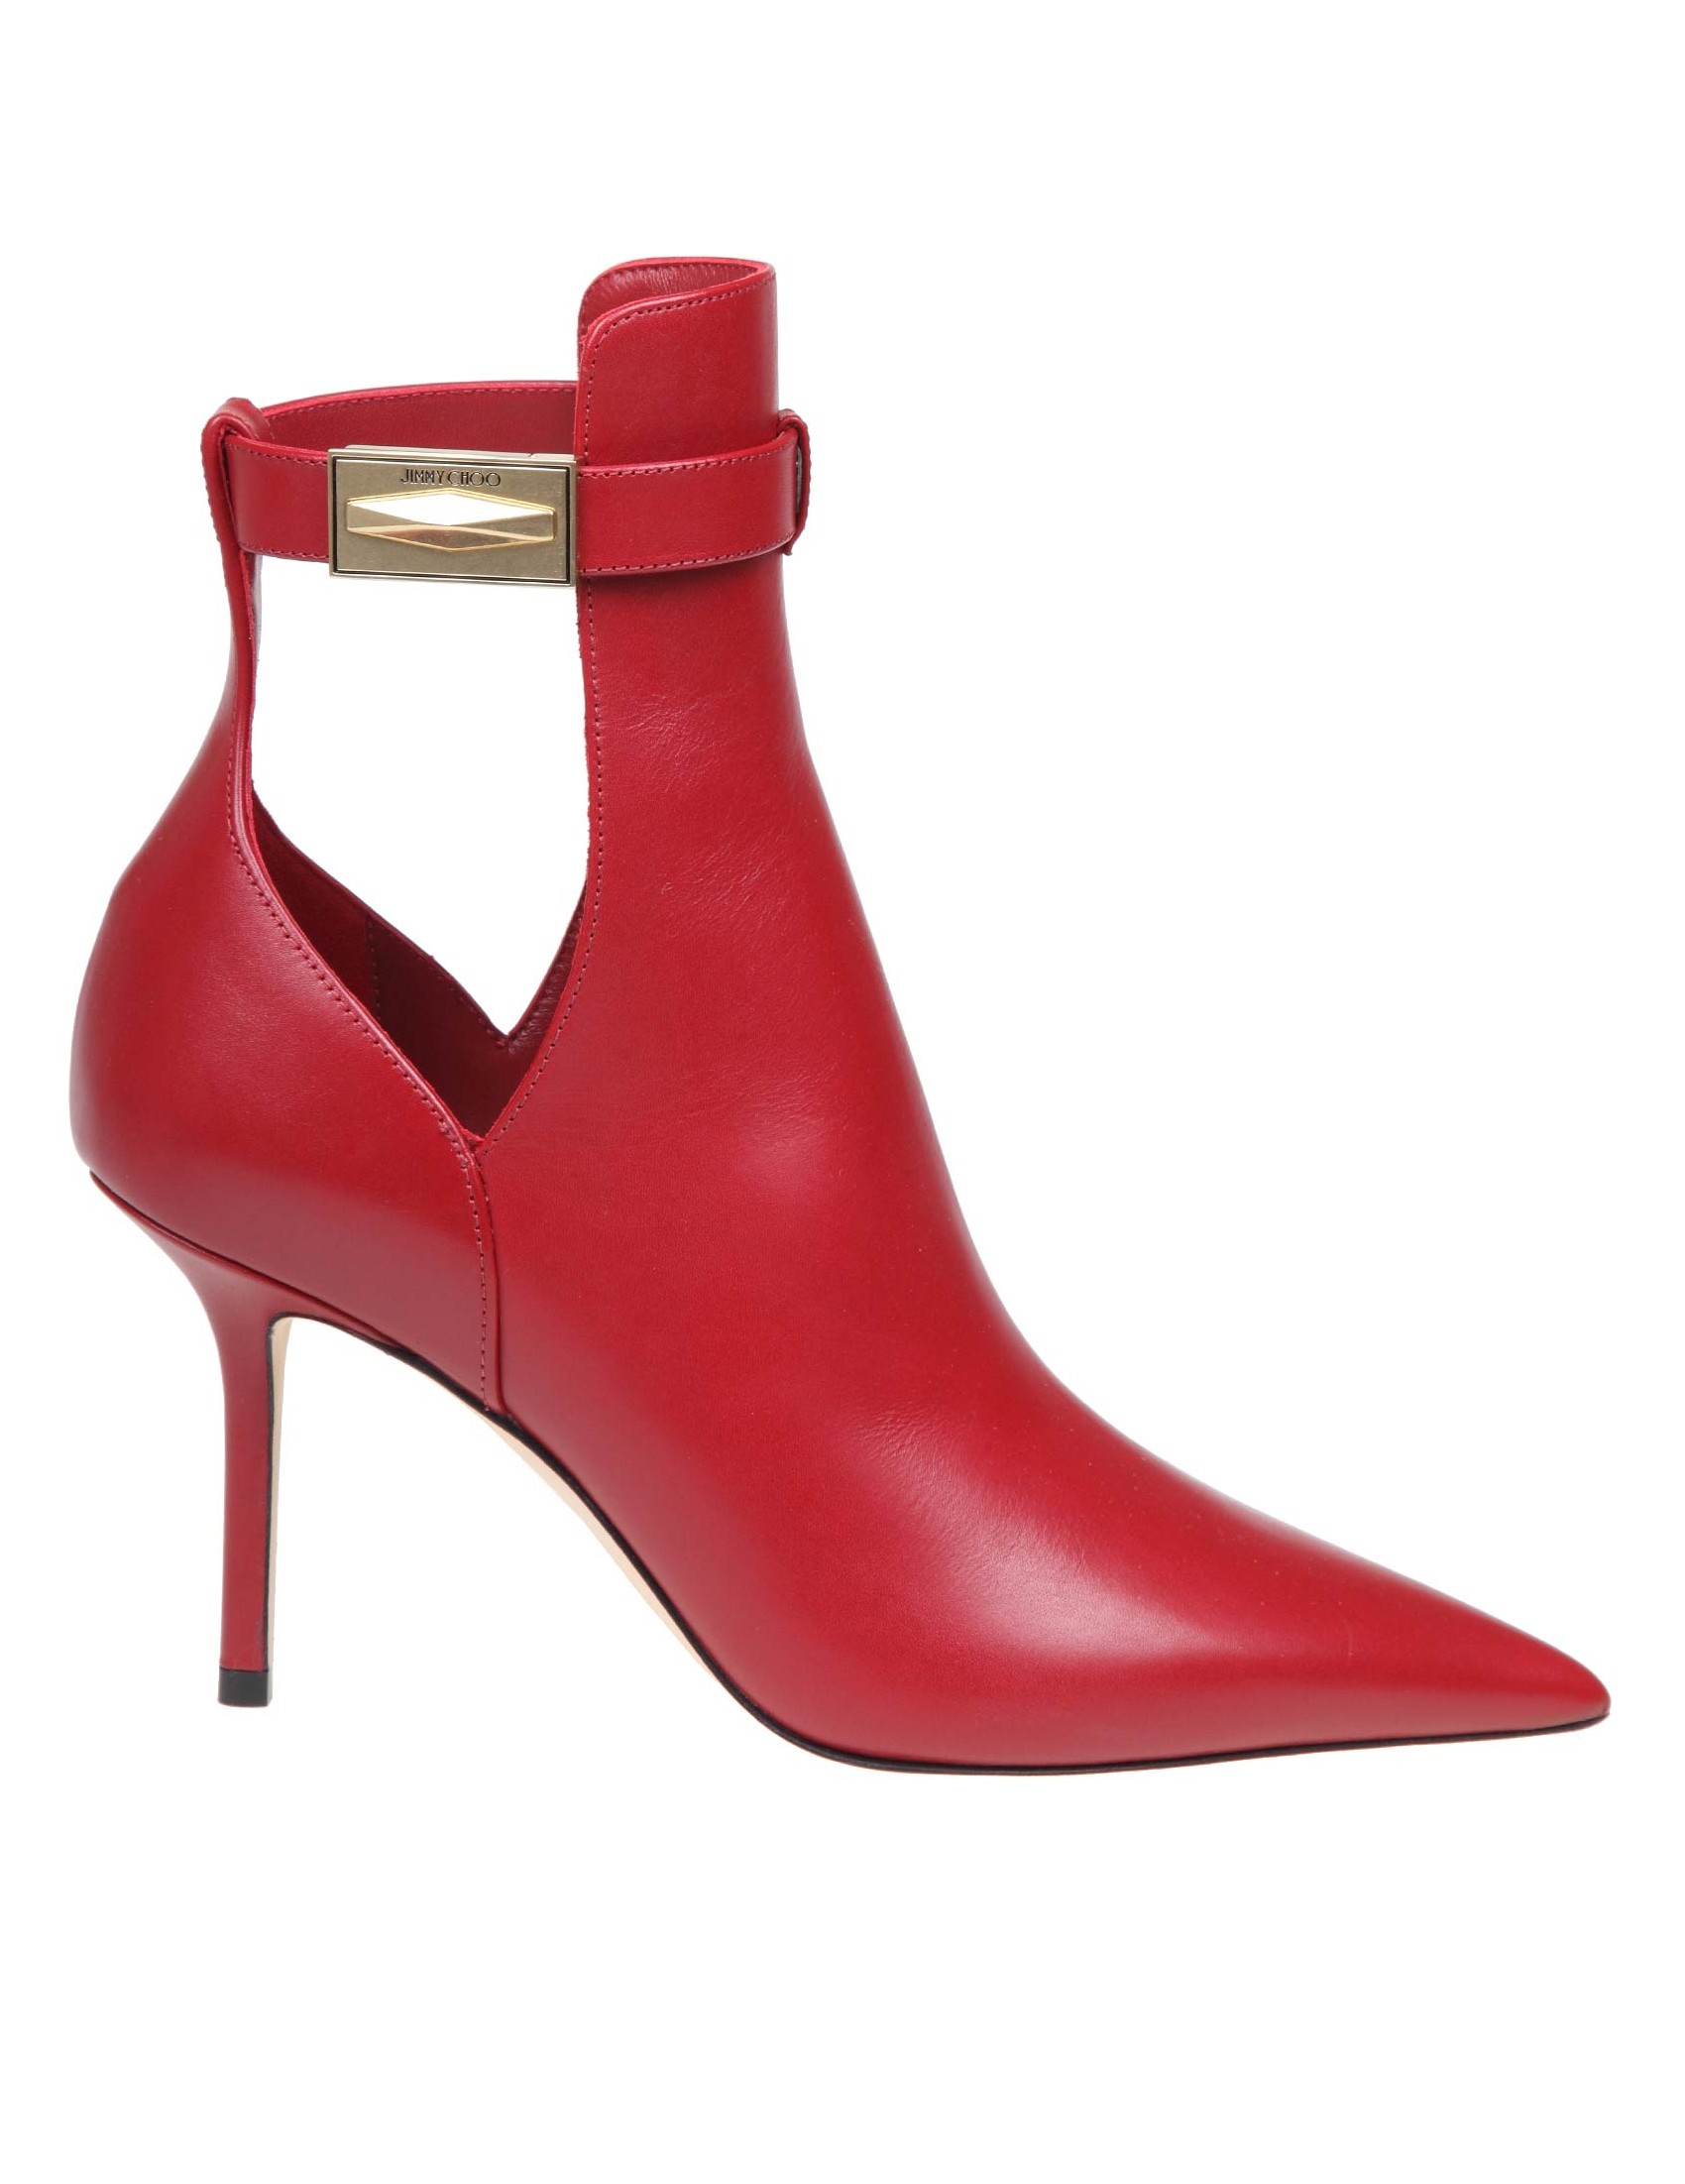 JIMMY CHOO BOOT IN AB 85 IN BORDEAUX COLOR LEATHER